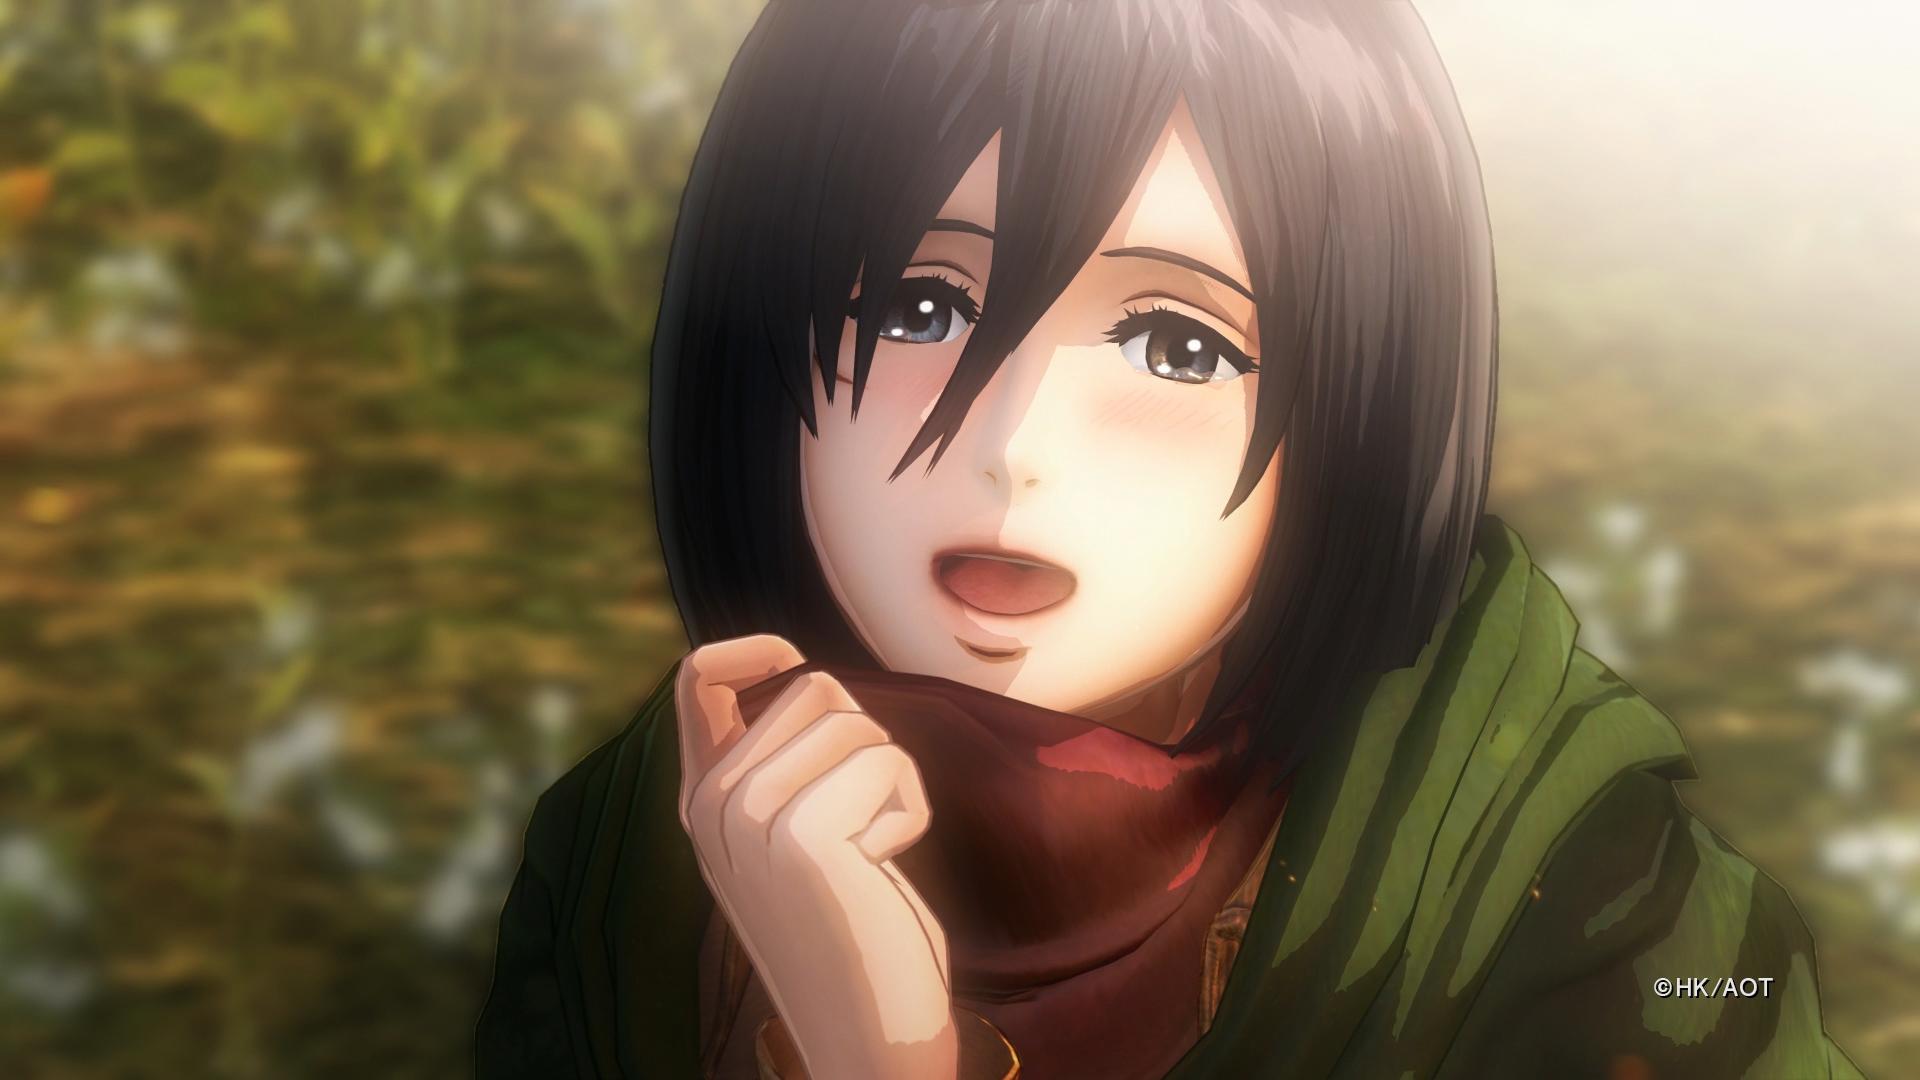 Attack on Titan 2 Confirmed for PS4 and Xbox One with Pro and X